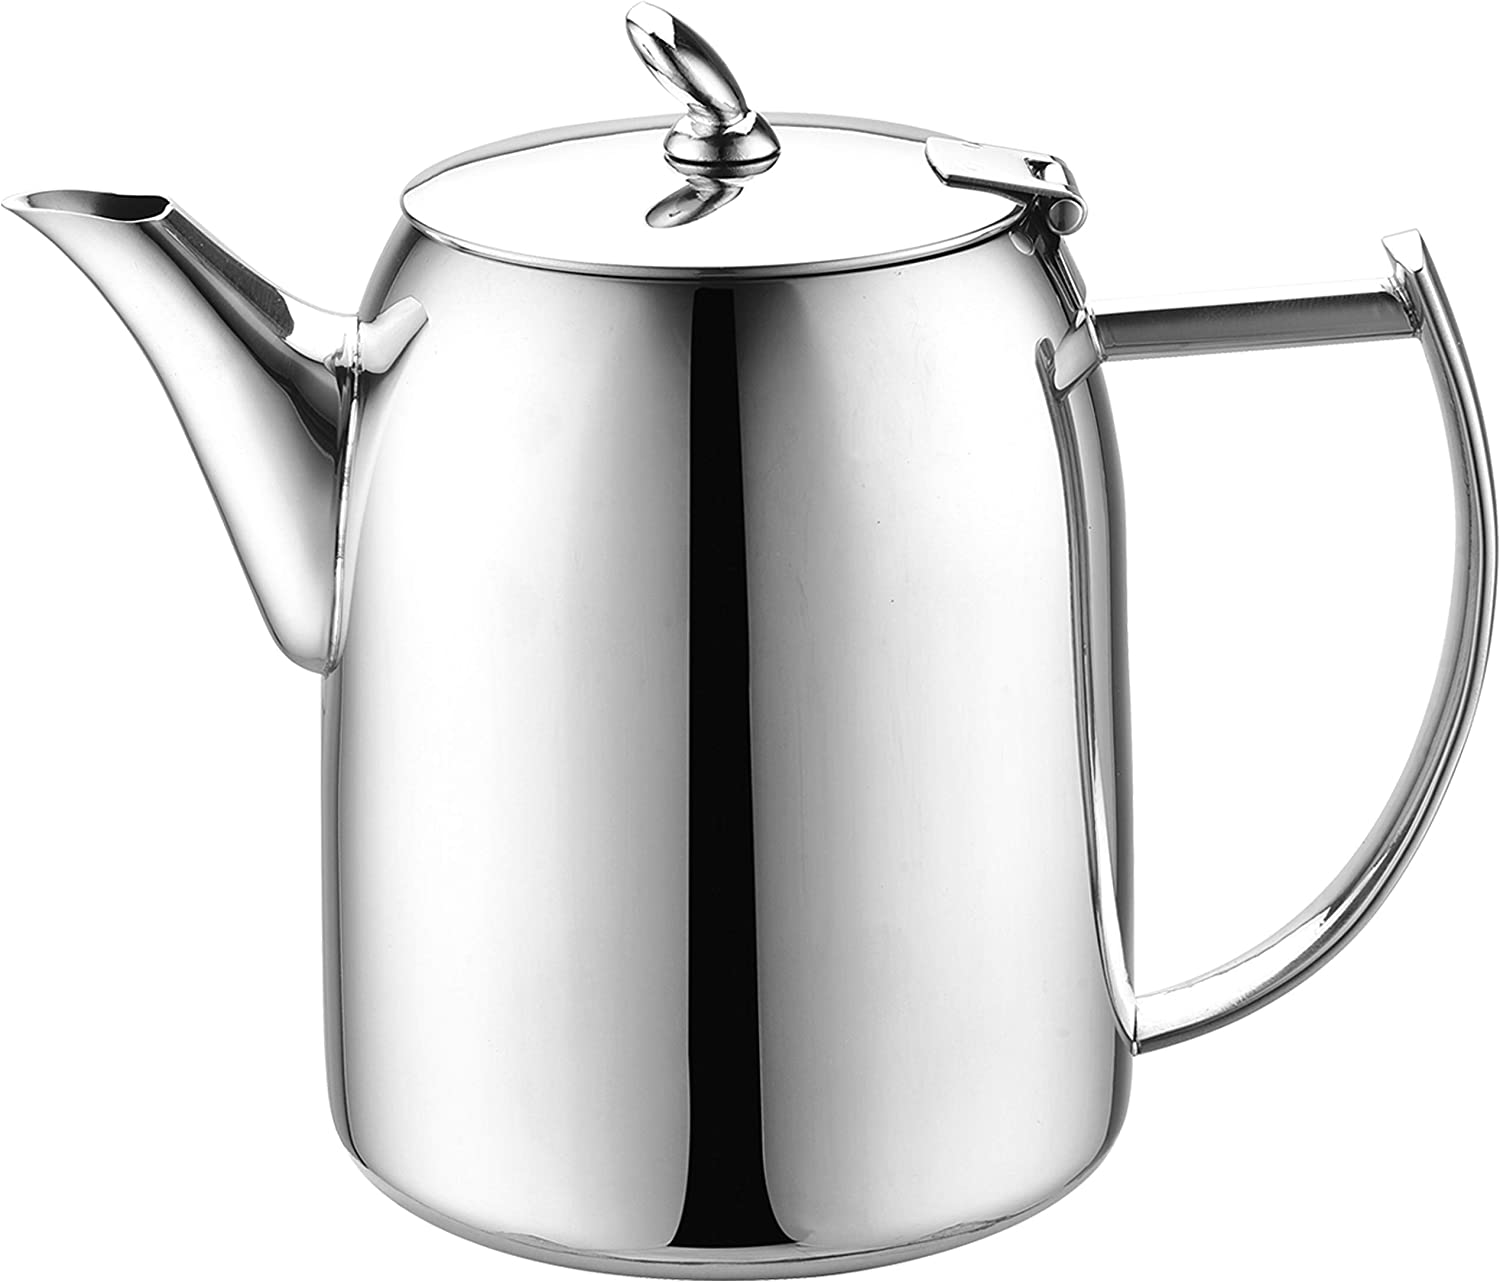 Cafe Ole Café Olé CHC-032 Chatsworth Coffee Pot with Unique Lid Made of High Quality 18/10 Stainless Steel - High Gloss Polish, 32oz, 0.9L, Cooking, Brewing Coffee, Drip Free Casting, Stainless Steel